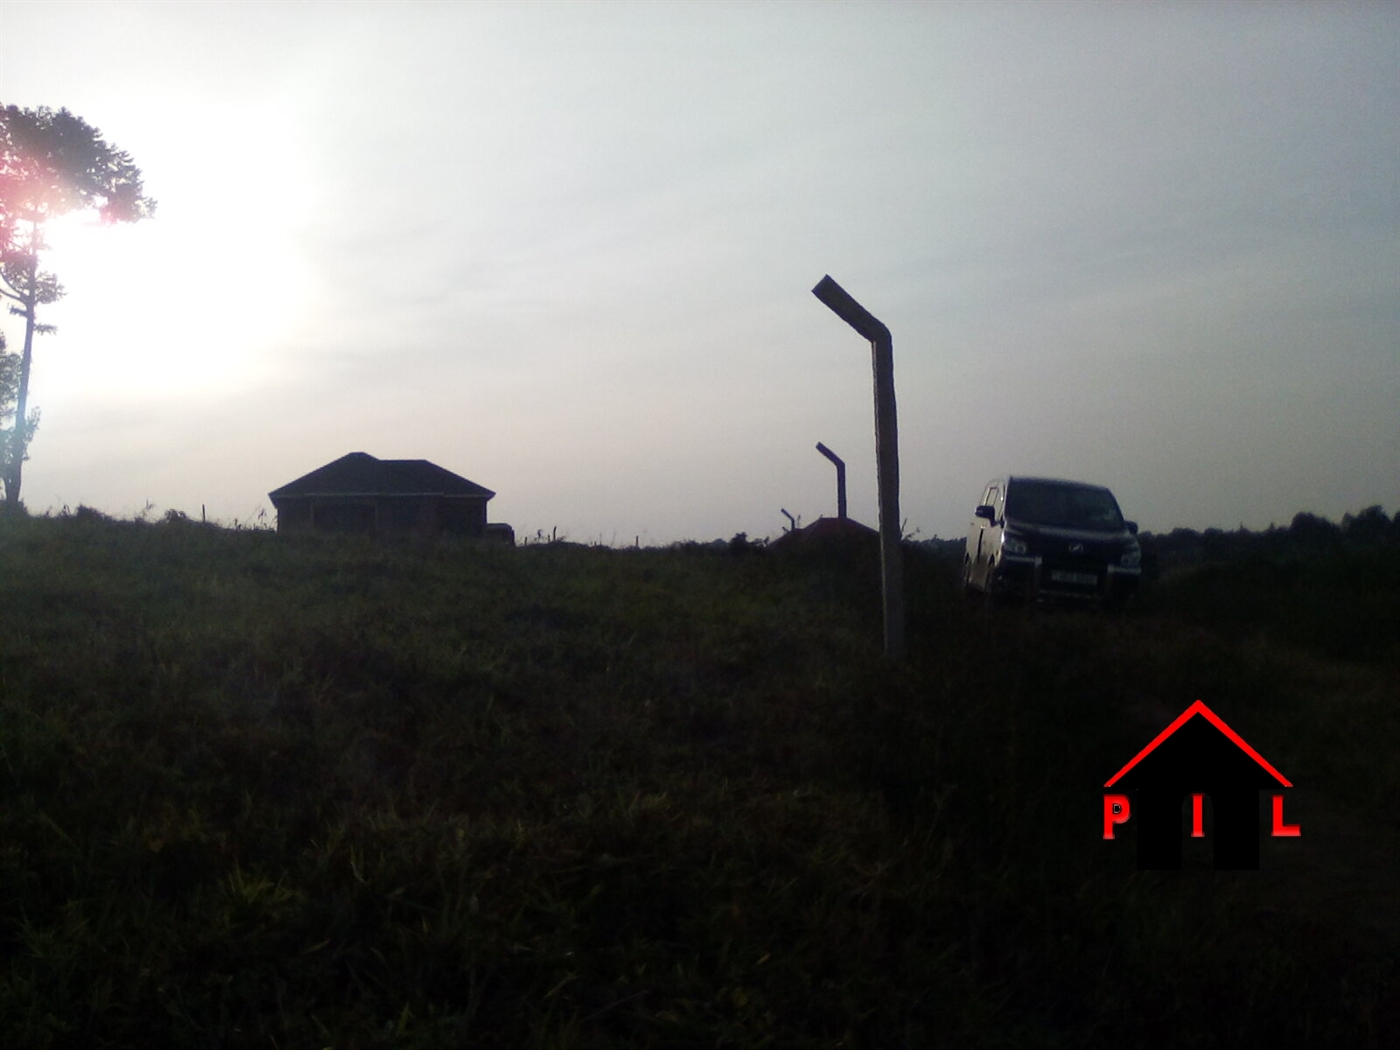 Commercial Land for sale in Tooro Busia